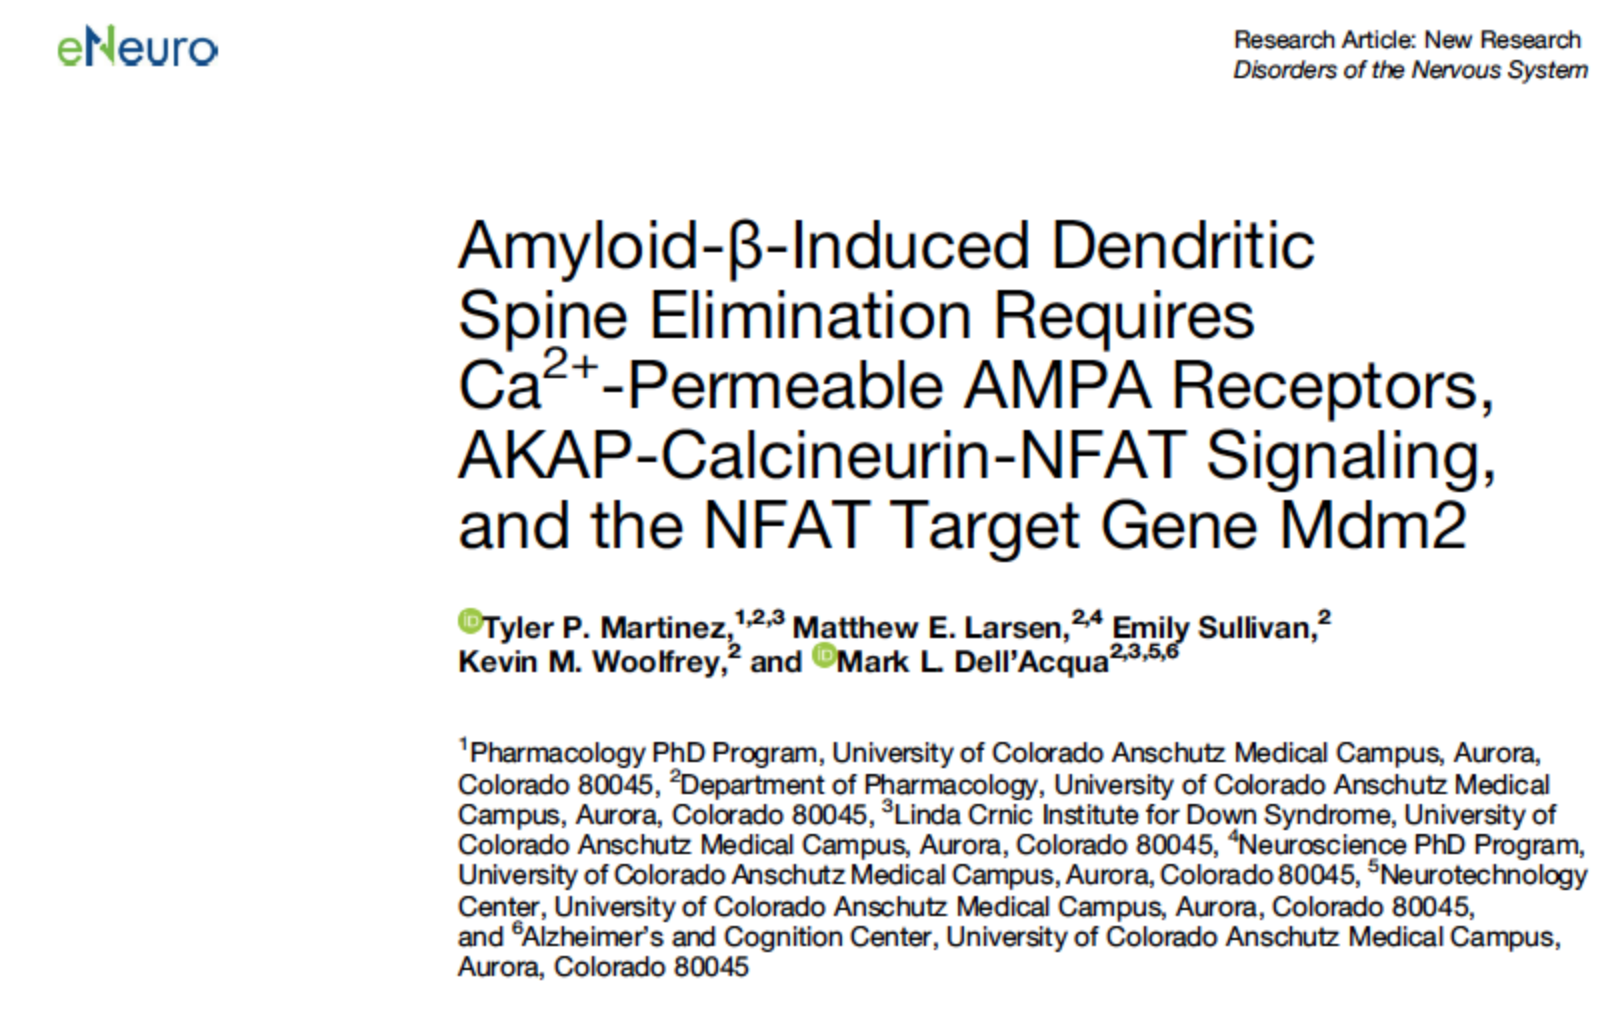 Amyloid-β-Induced Dendritic Spine Elimination Requires Ca2+-Permeable AMPA Receptors, AKAP-Calcineurin-NFAT Signaling, and the NFAT Target Gene Mdm2